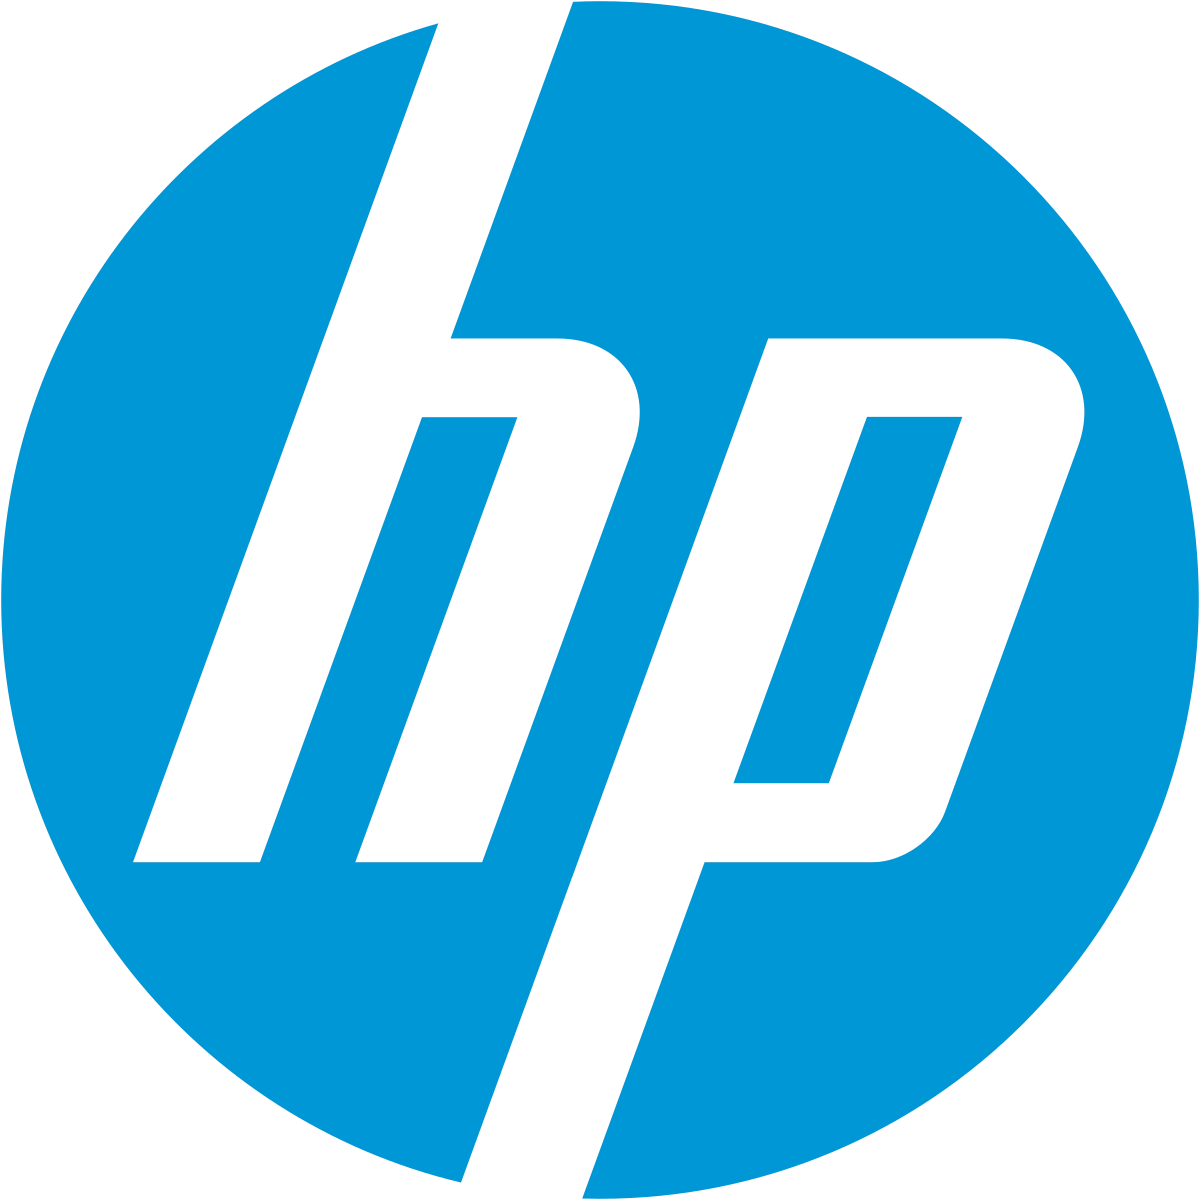 HP - Laptops, PCs and more